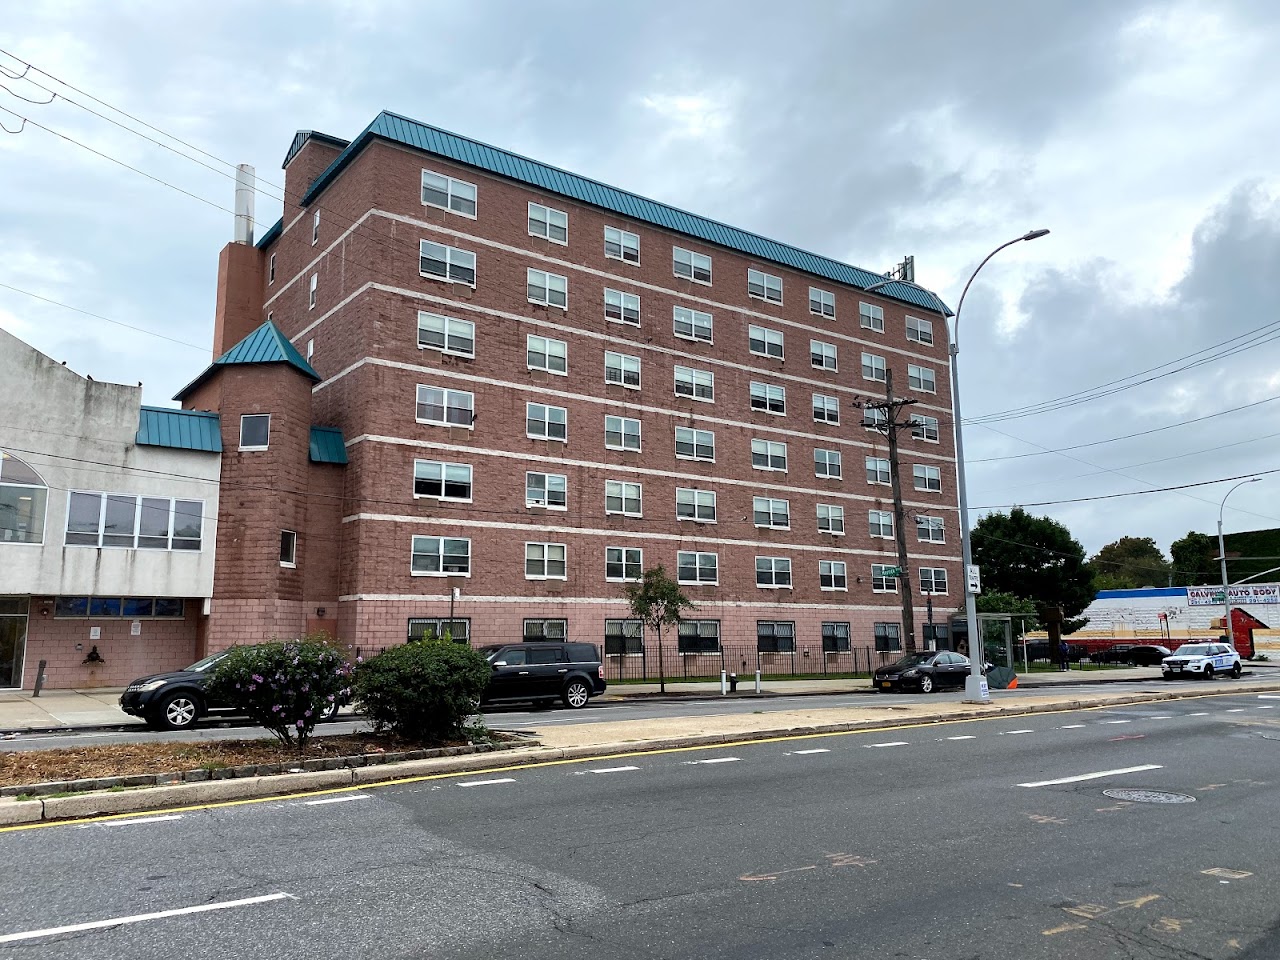 Photo of ALLEN SENIOR RESIDENCES. Affordable housing located at 10702 MERRICK BLVD JAMAICA, NY 11433